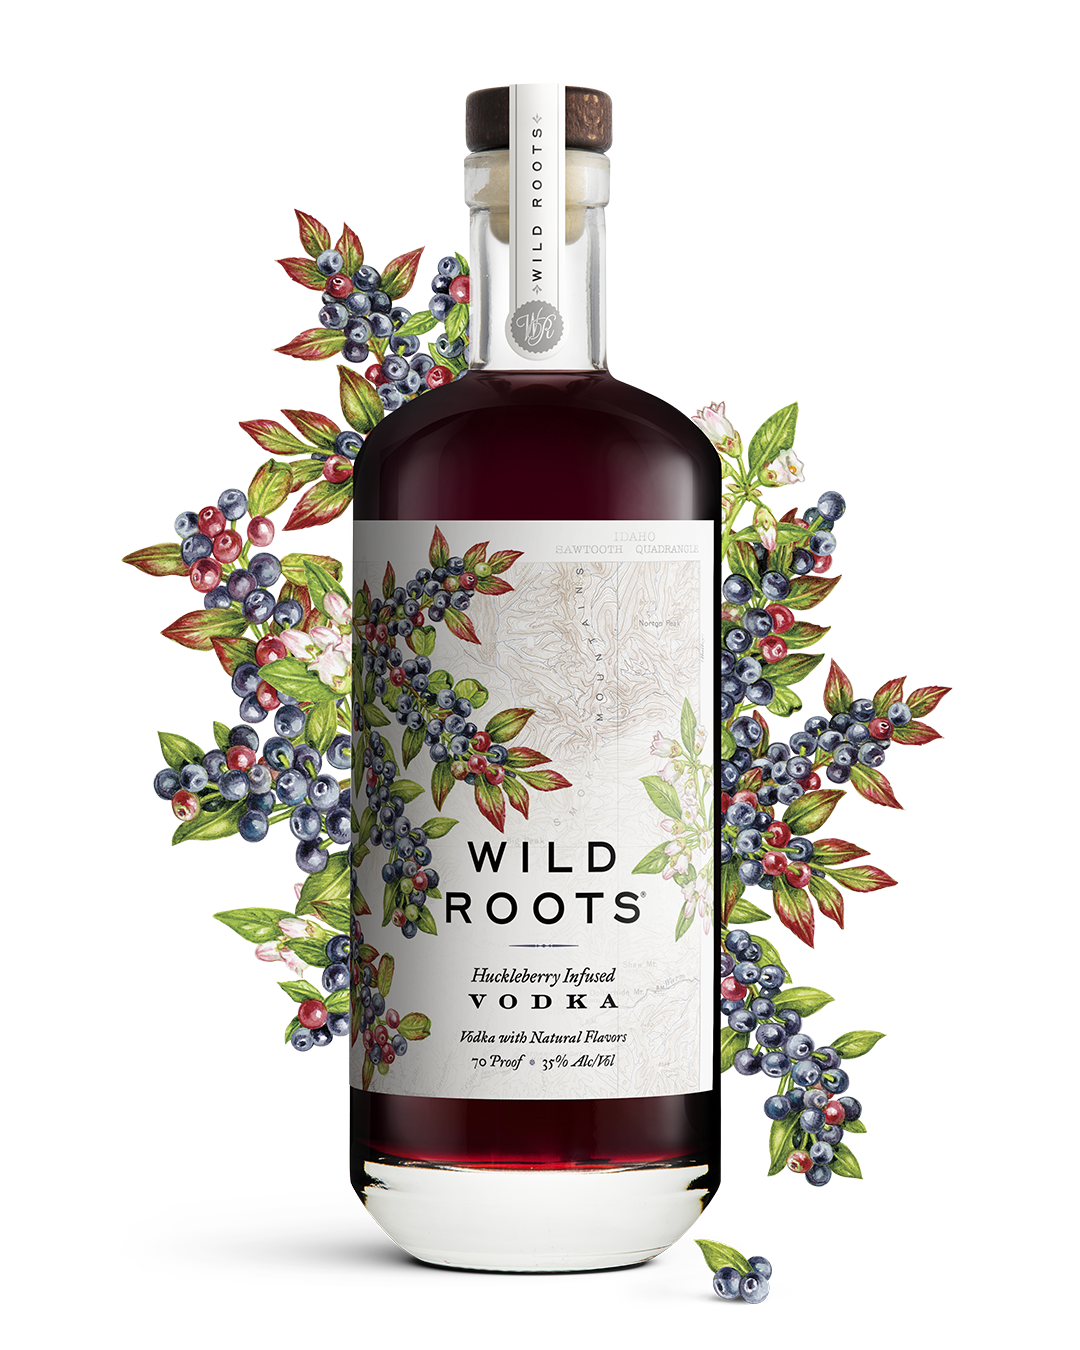 London Dry Gin Wild – Roots